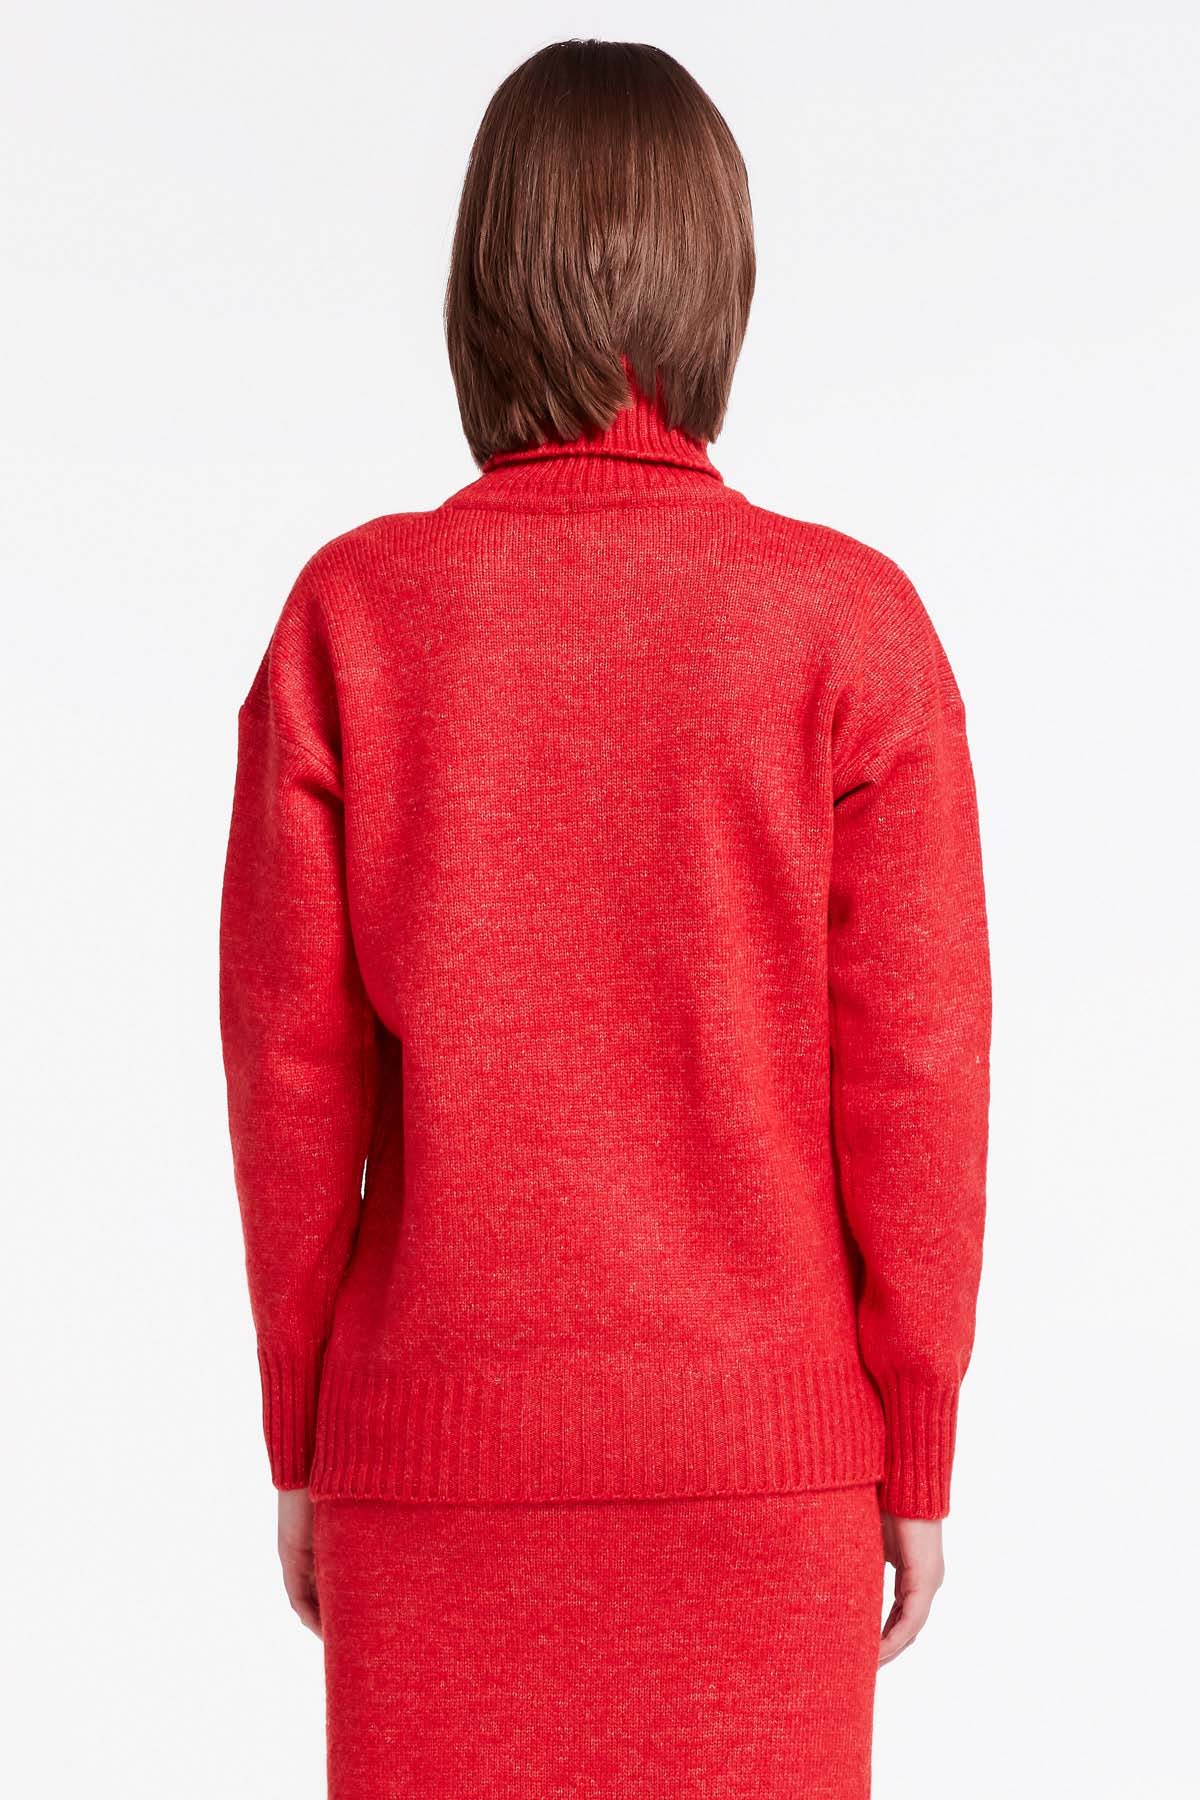 Red knit sweater, photo 4